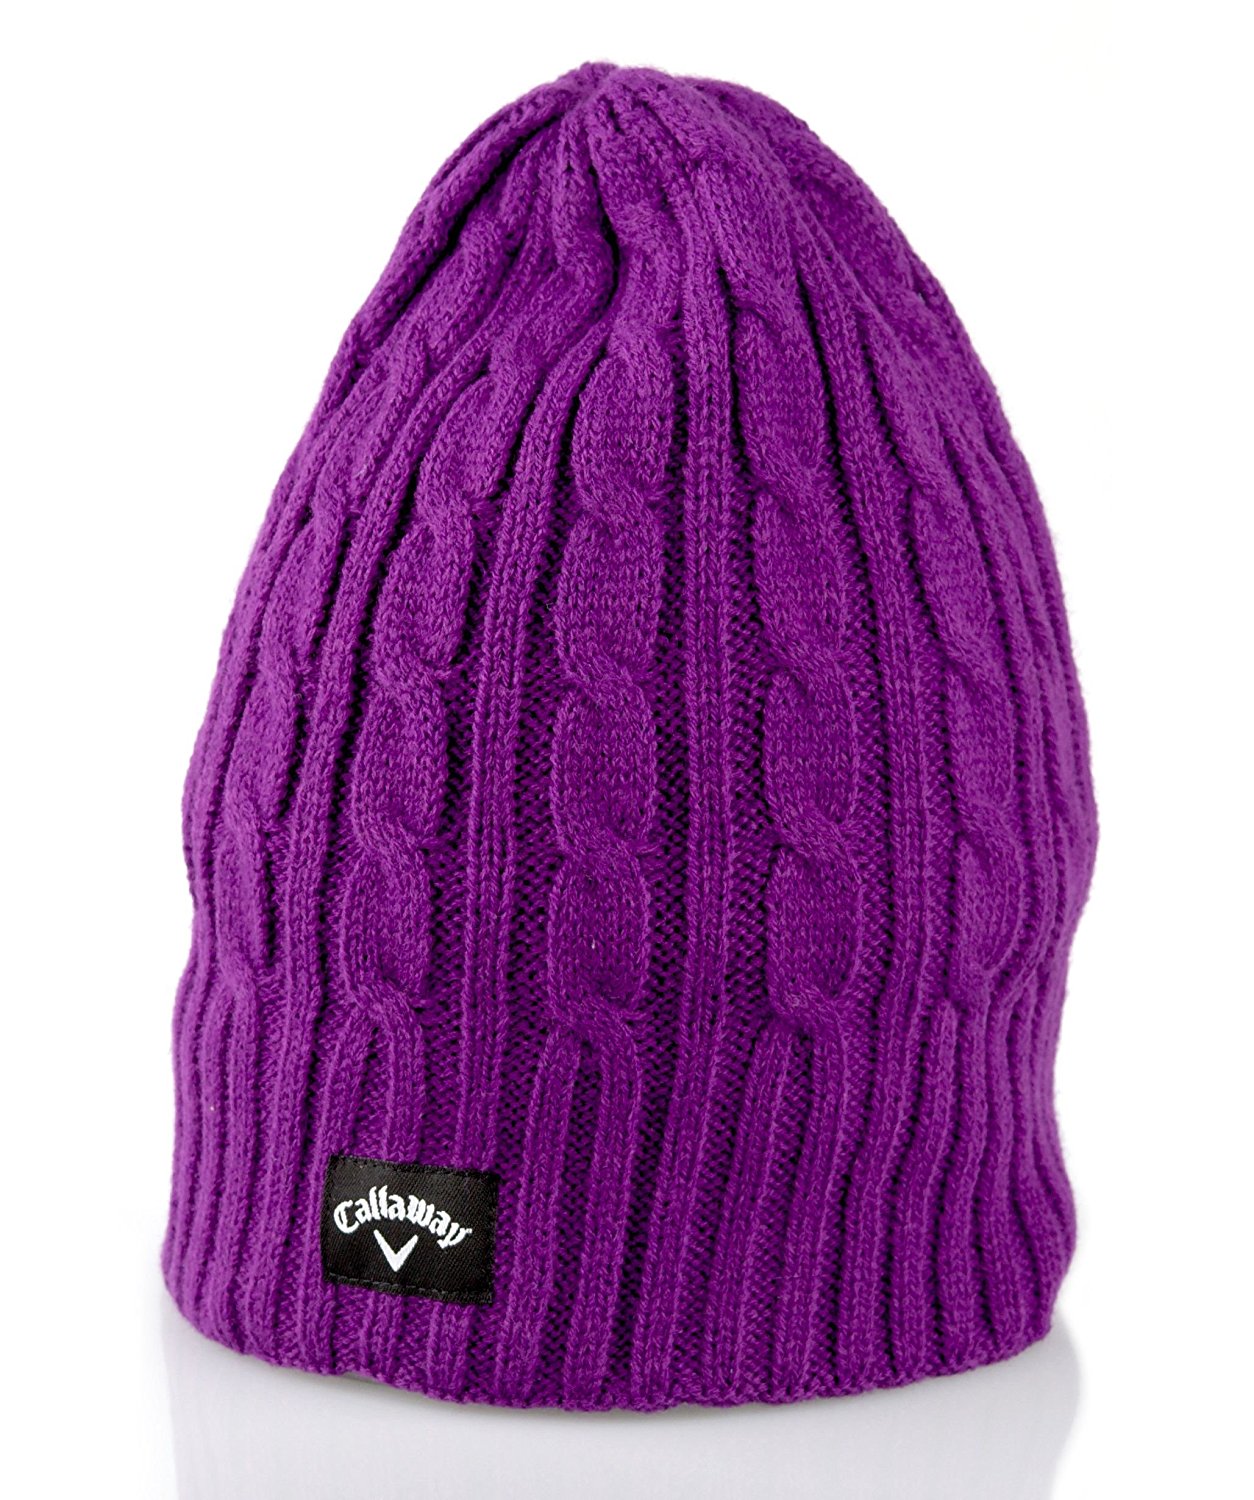 Womens Adidas Cable Knit Winter Thermal Golf Beanie Cap Hats